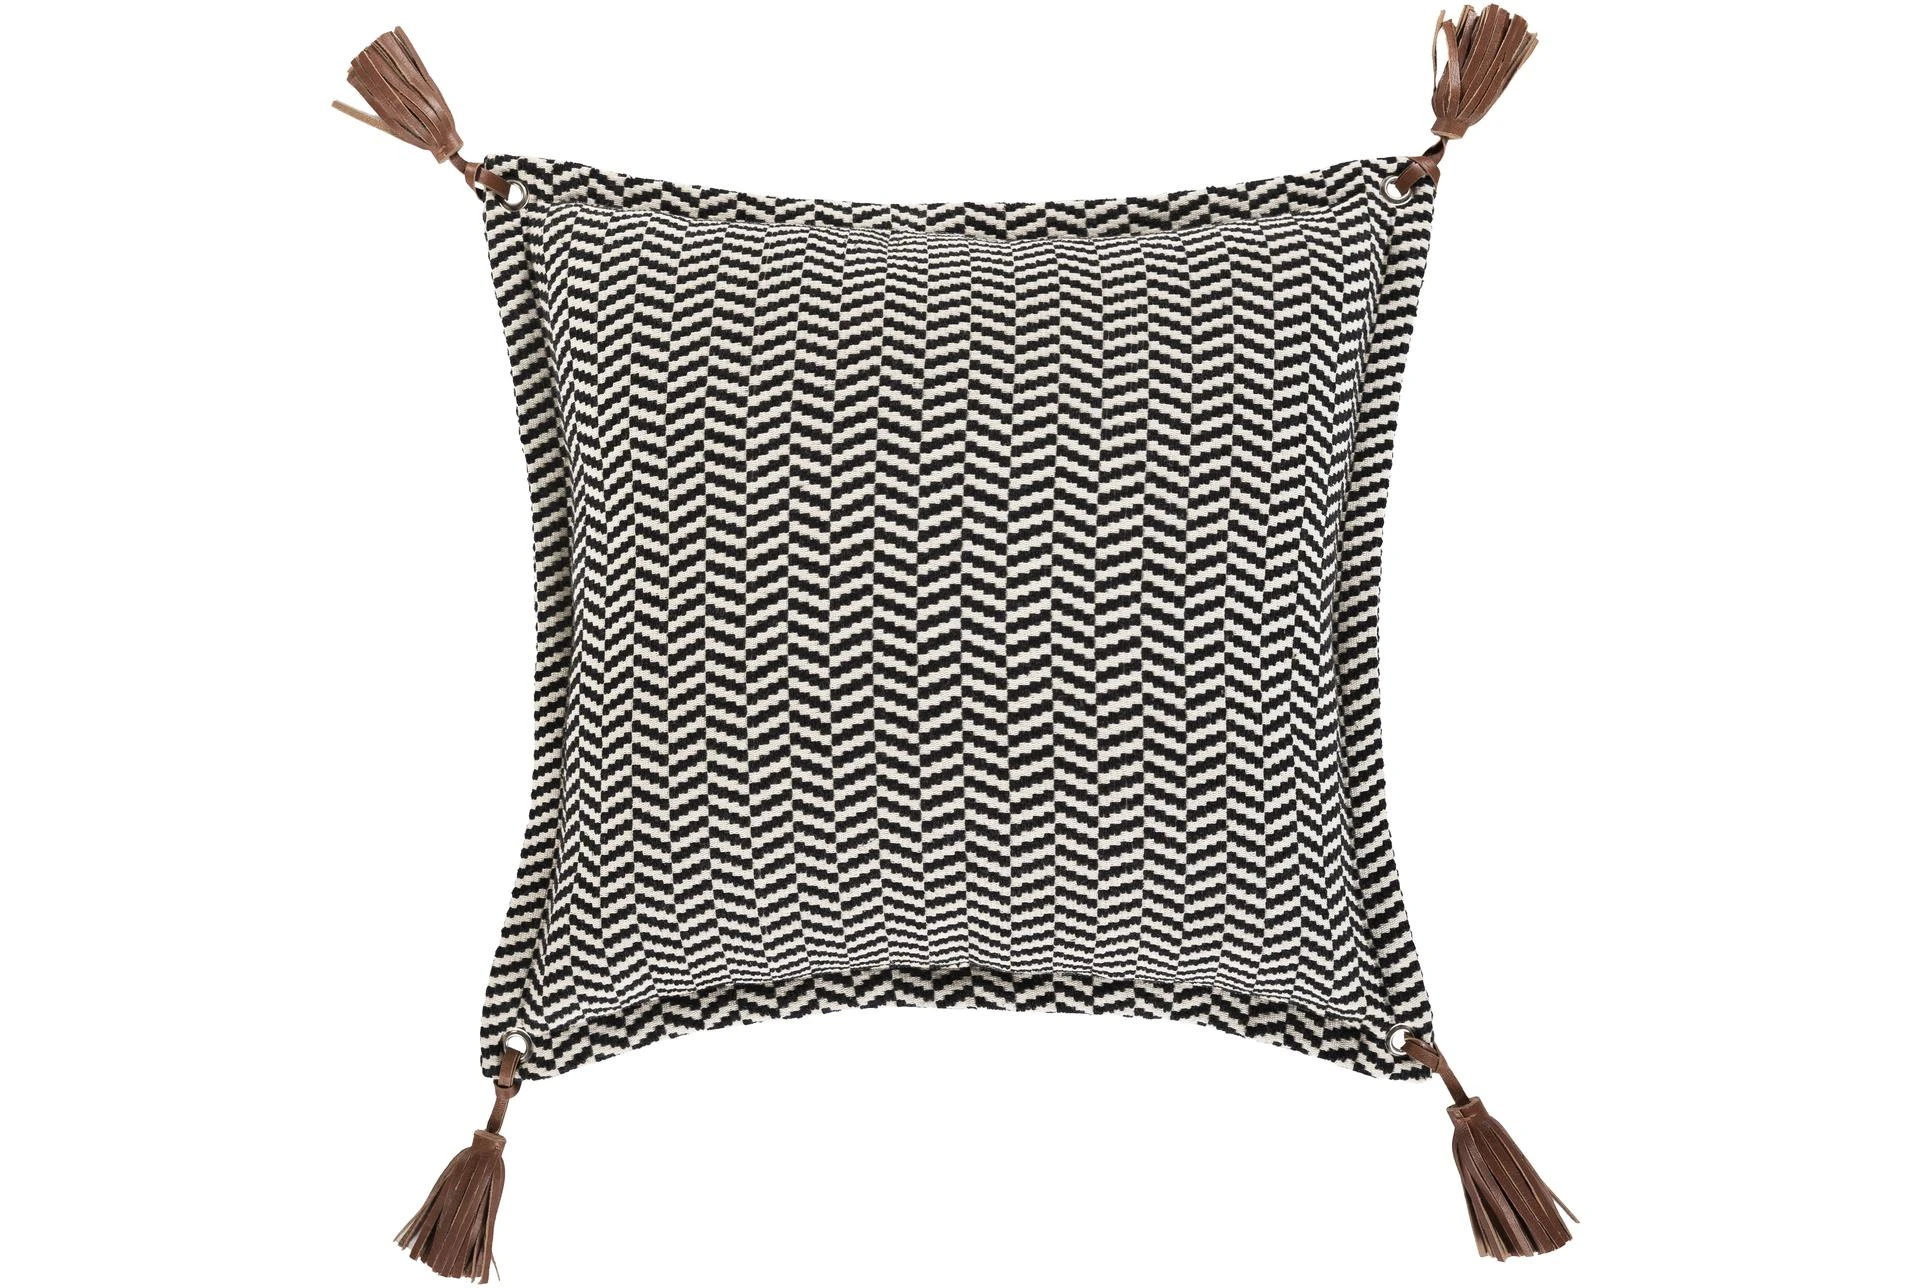 Accent Pillow-Herringbone & Leather Band 13X20